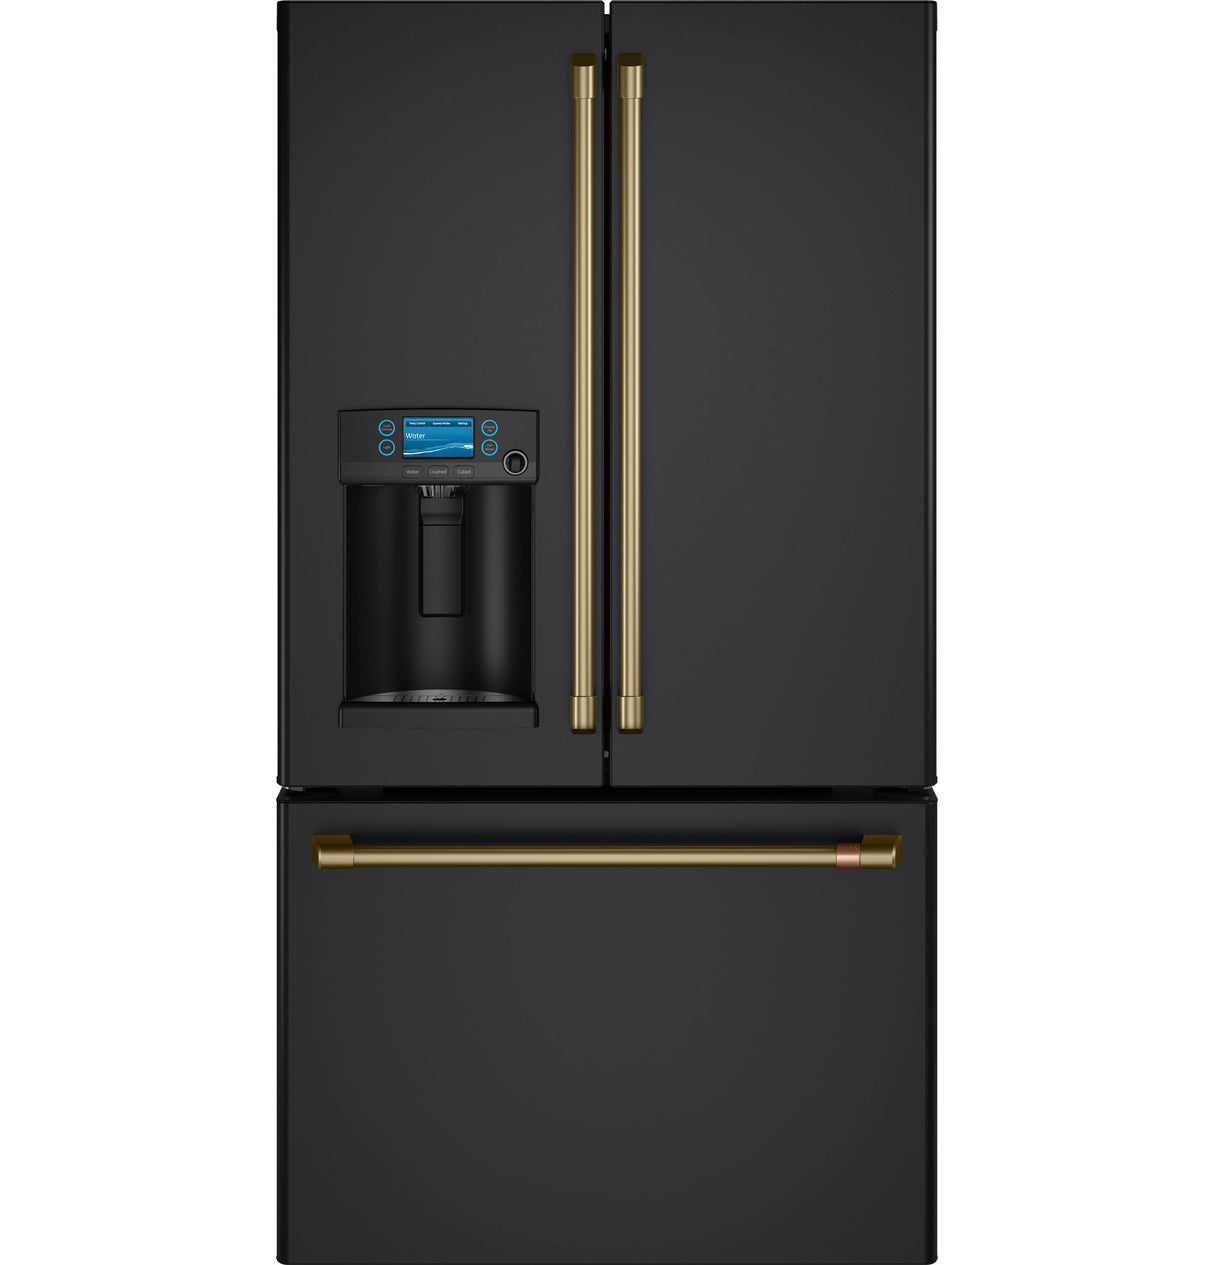 Caf(eback)(TM) ENERGY STAR(R) 22.1 Cu. Ft. Smart Counter-Depth French-Door Refrigerator with Hot Water Dispenser - (CYE22TP3MD1)